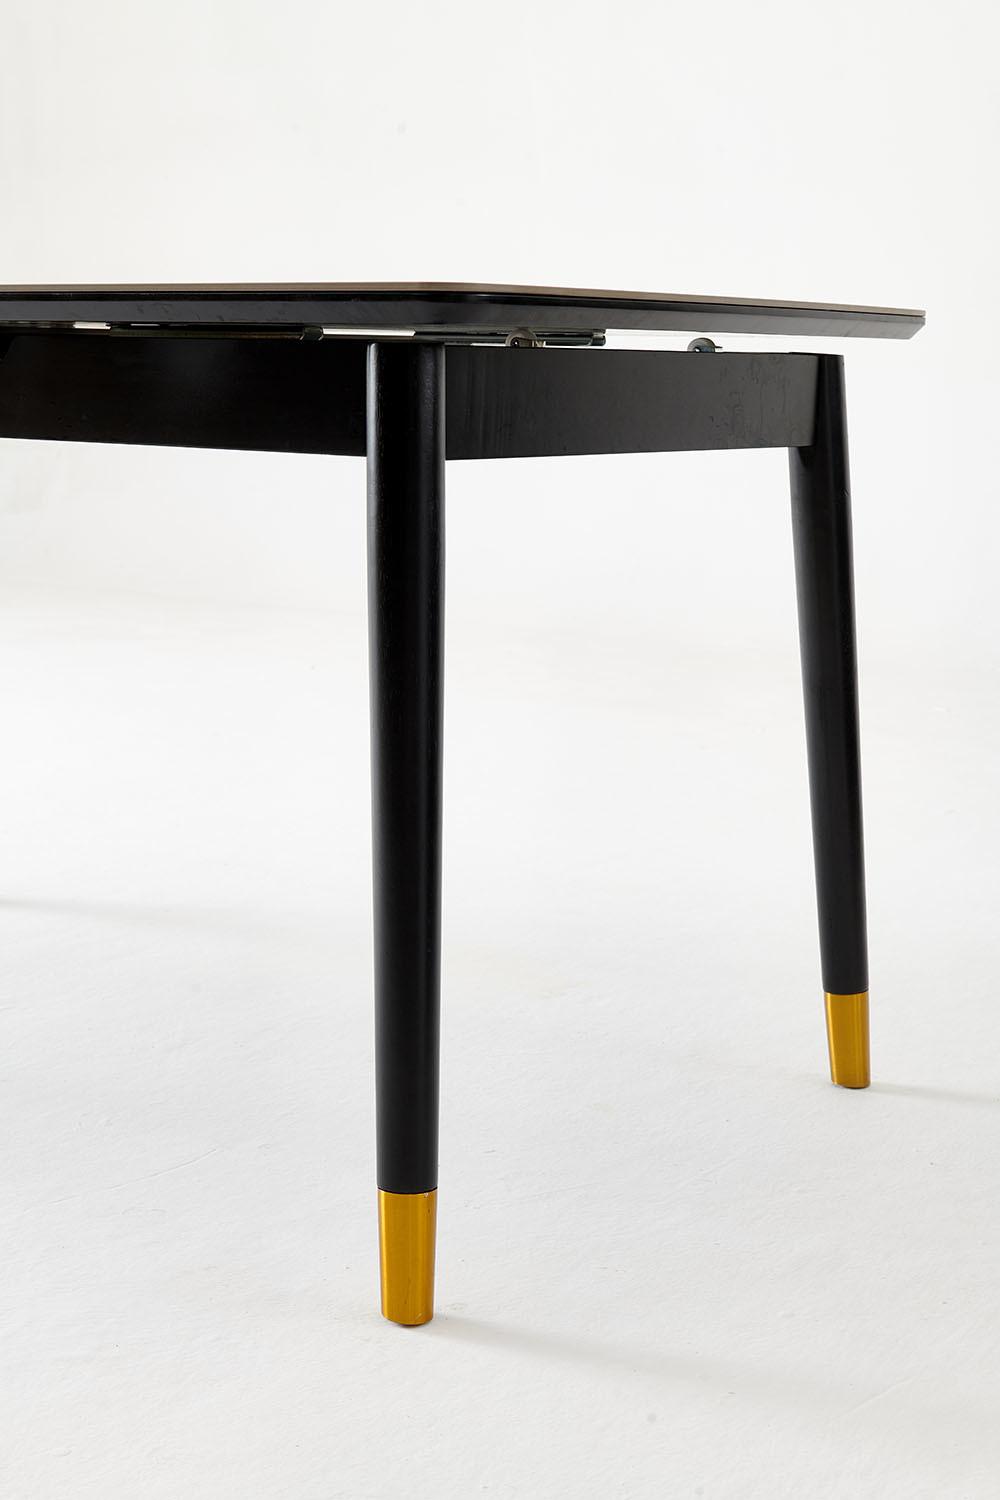 Pandora Marble Dining Table with Carbon Steel Legs